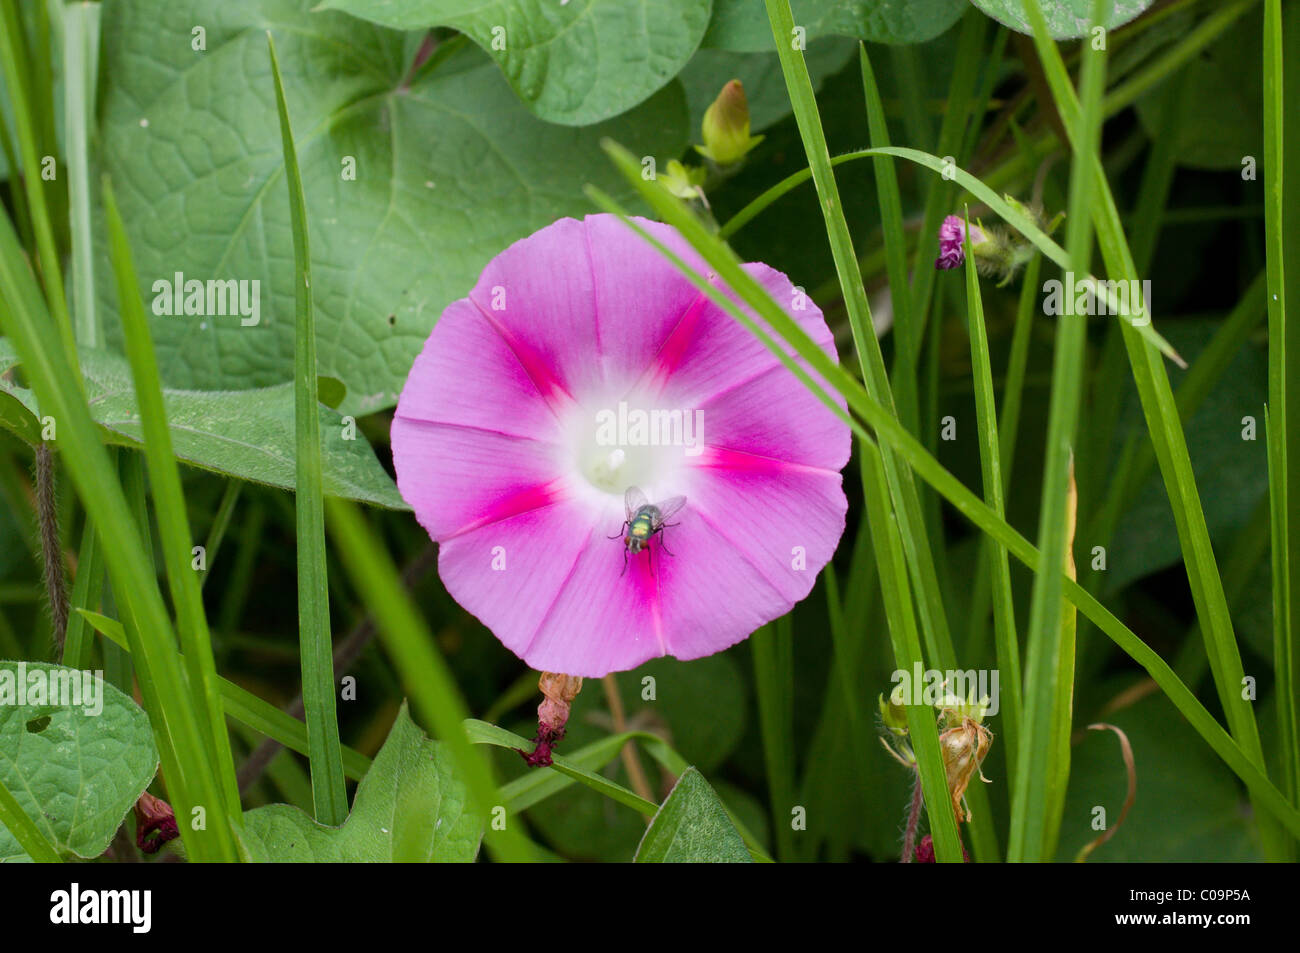 Photo of a Morning glory flower (Ipomoea Violacea) with a green bottle fly  in Mexico Stock Photo